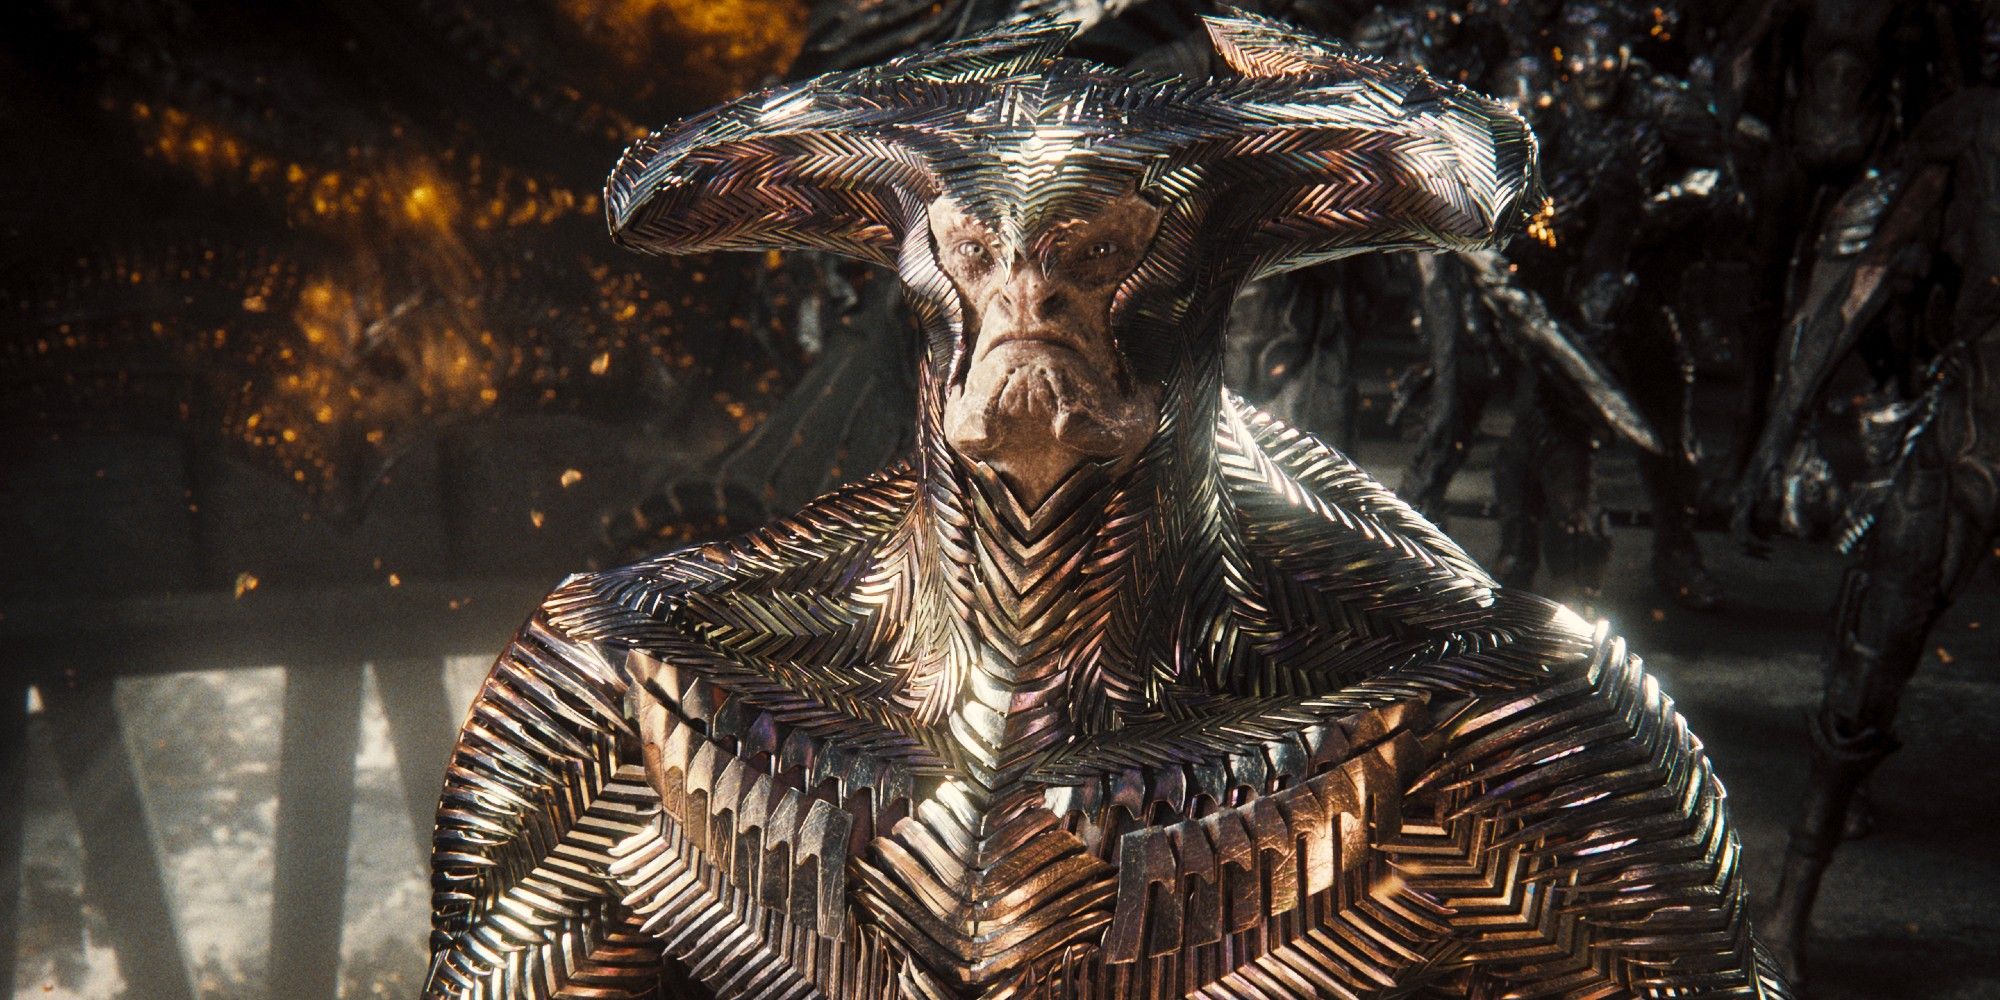 Steppenwolf from Zack Snyder's Justice League